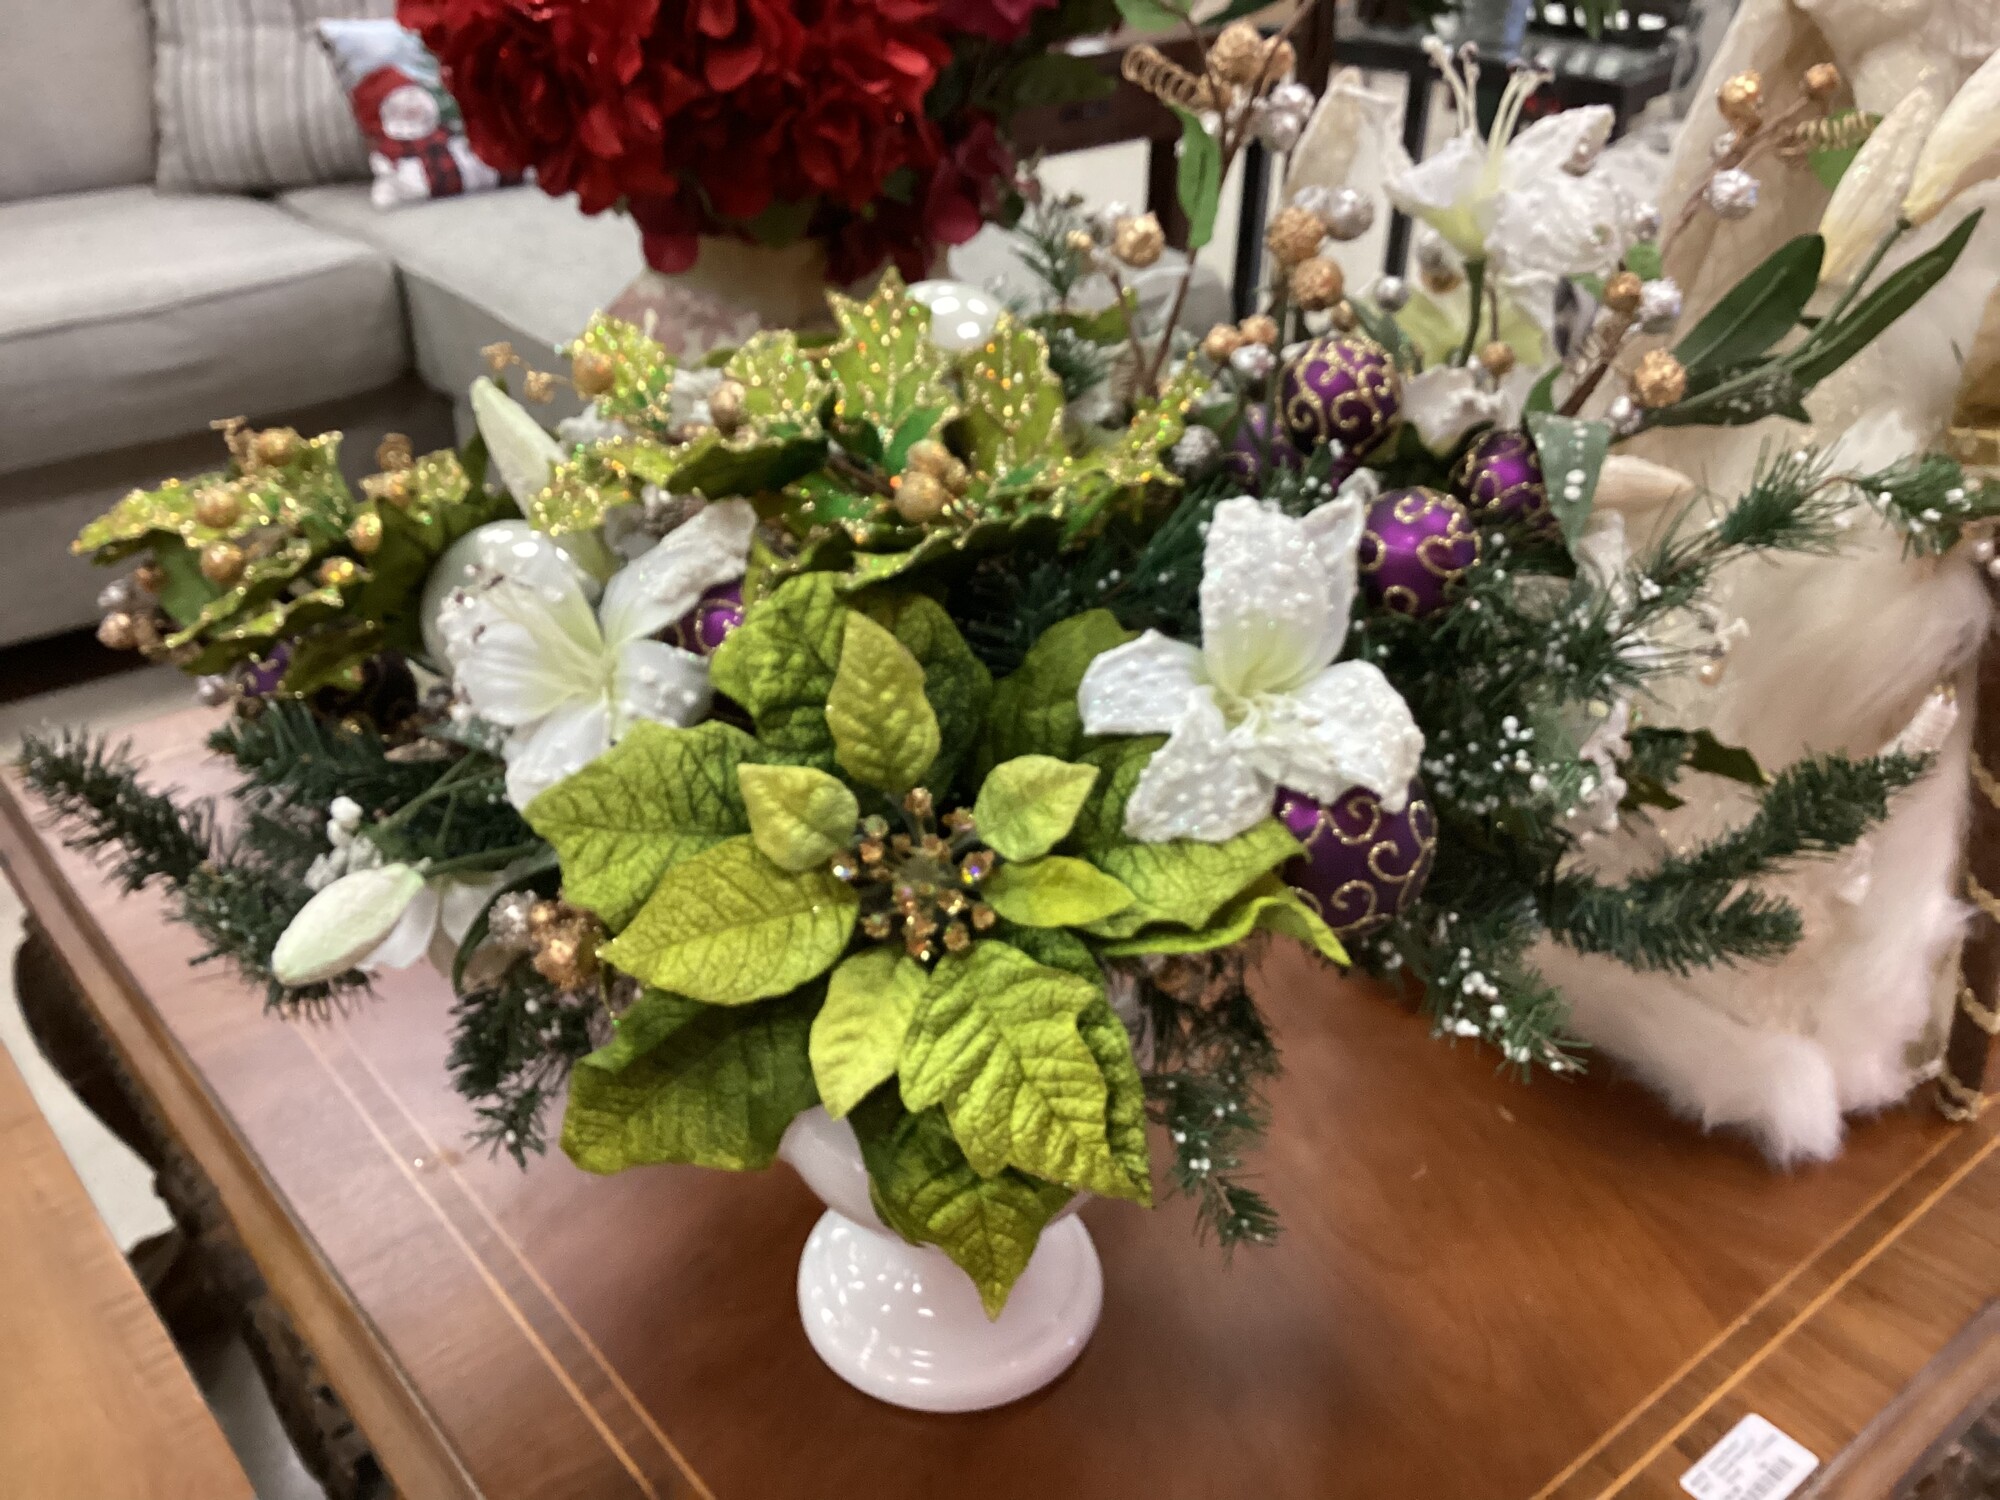 Centerpiece Green Poinsettia, White, Balls
27 in Wide x17 in Deep x 23 in Tall